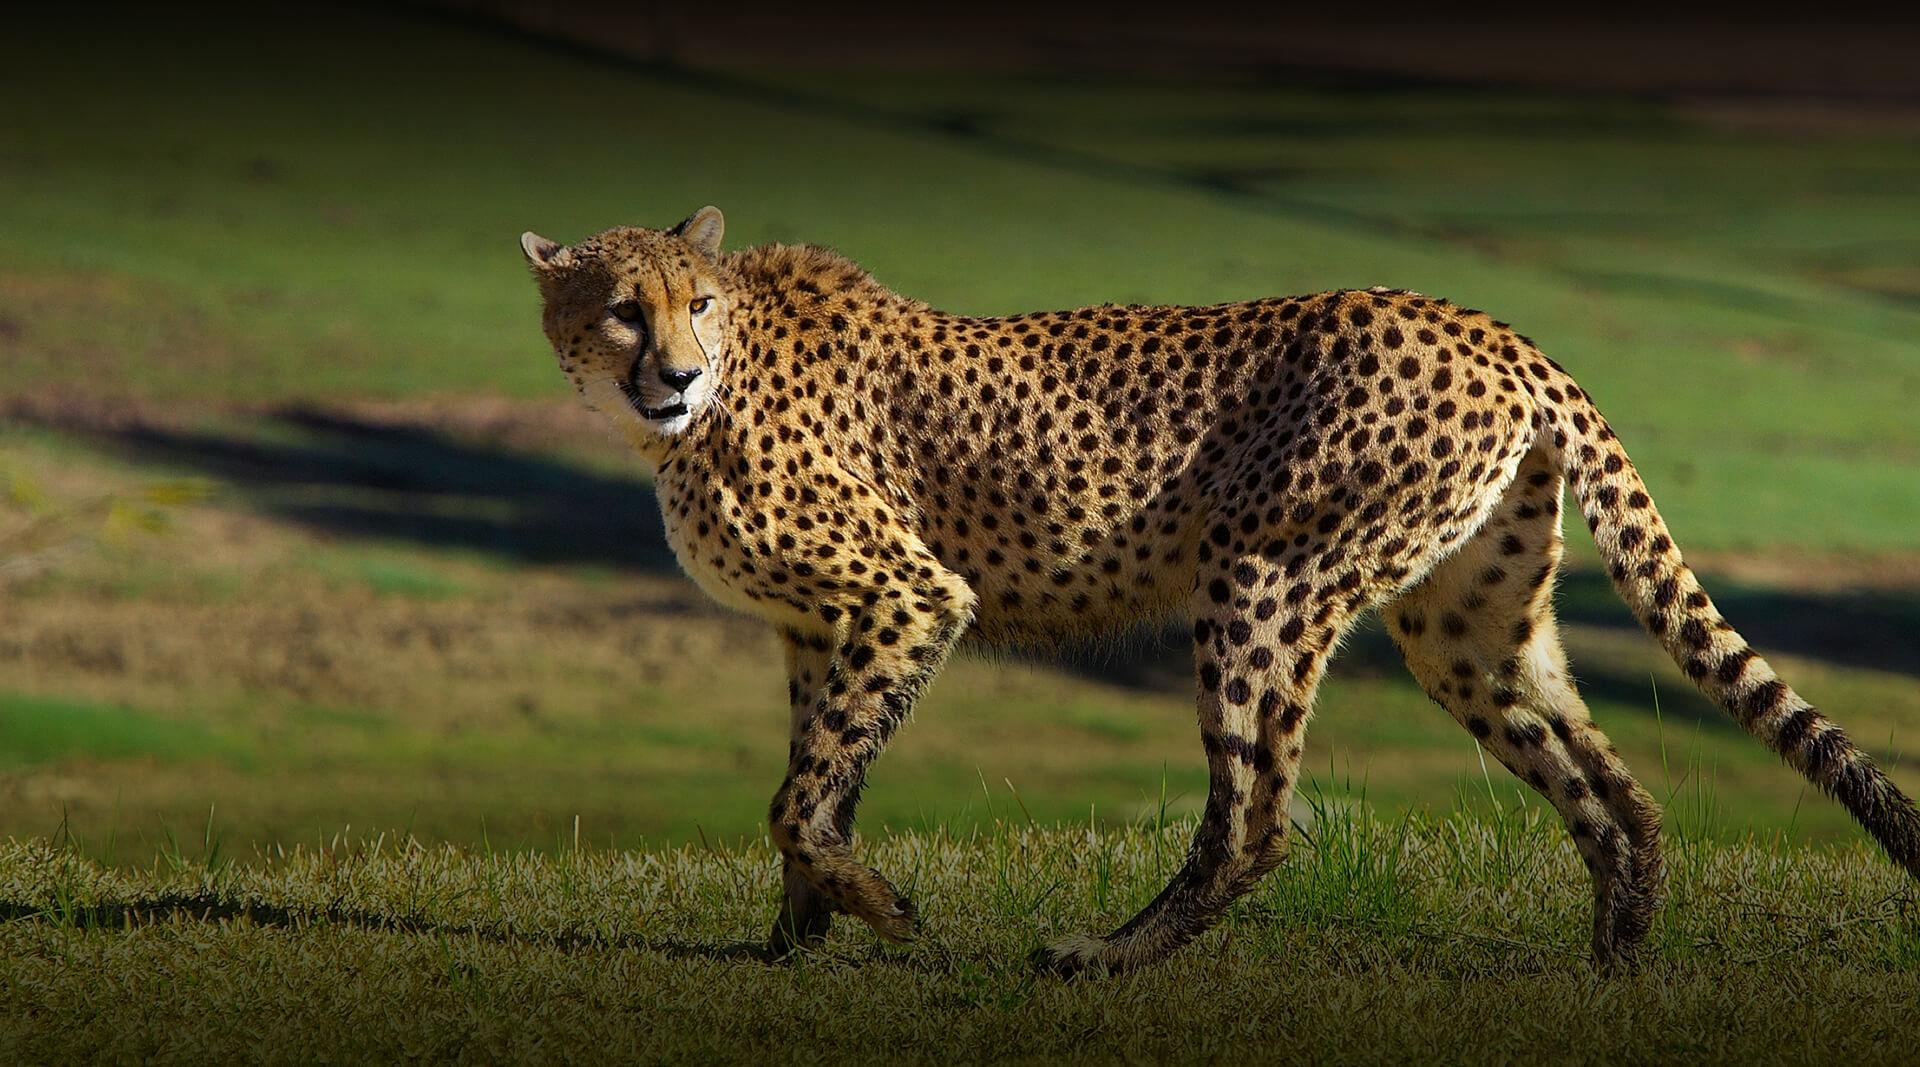 Cheetah looking over its back as it walks on grass.